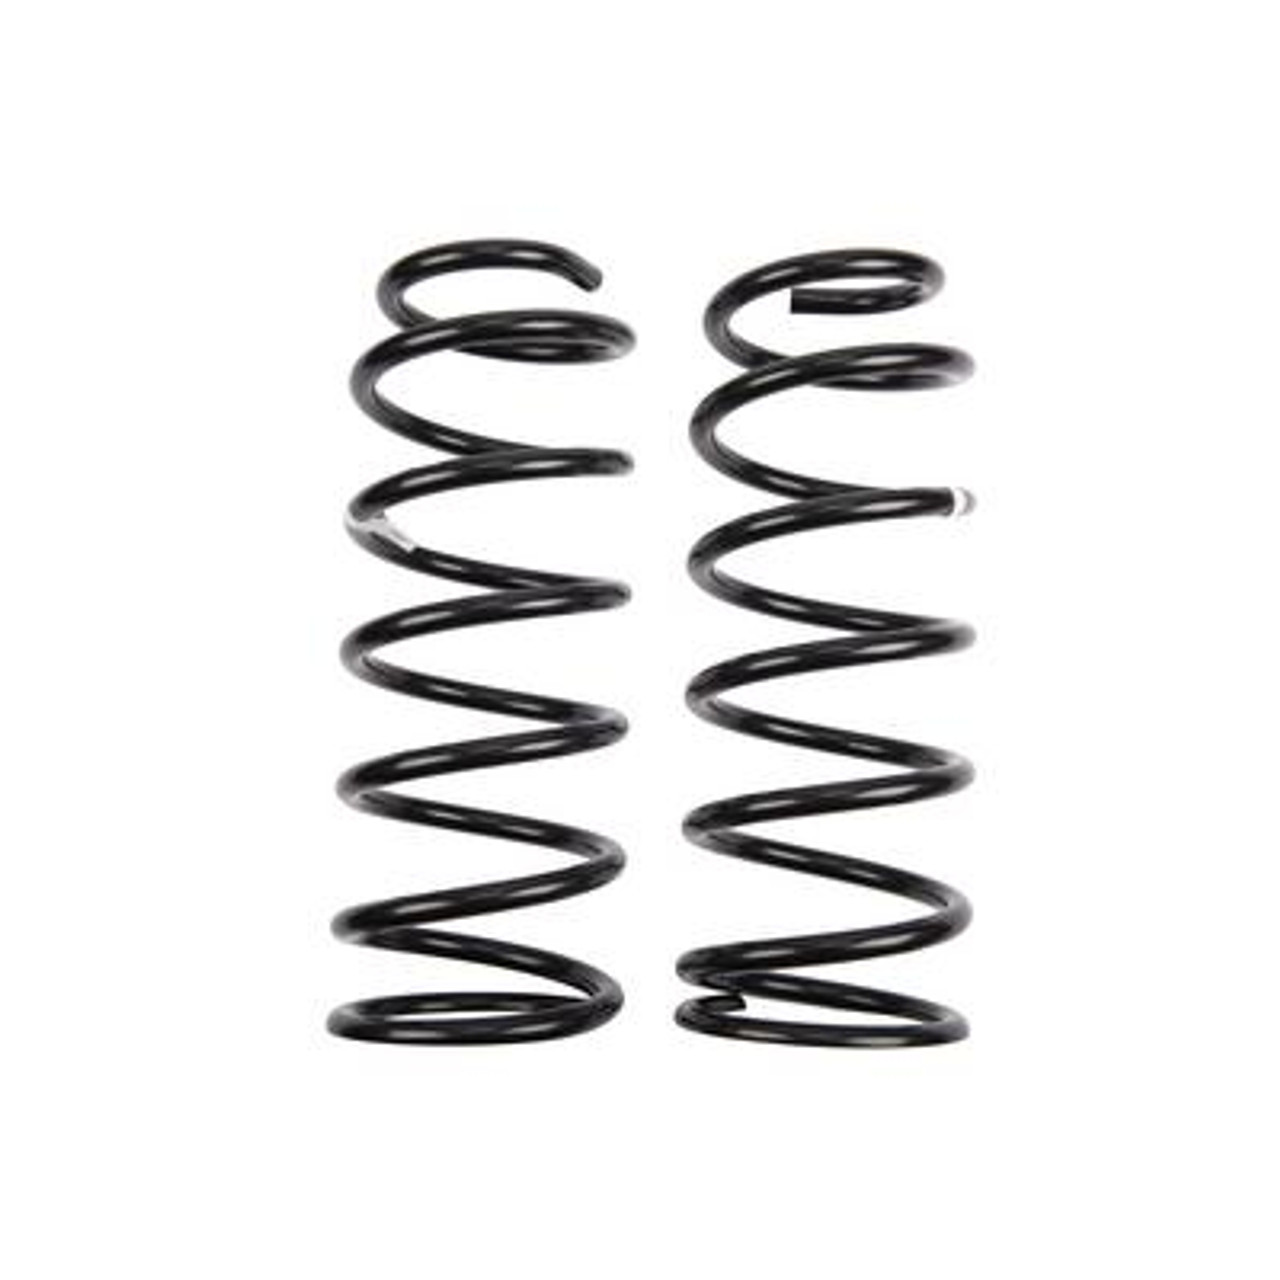 ARB / OME 08-20 Toyota Land Cruiser 200 Series Heavy Load BP-51 Lift Kit w/ KDSS- Springs